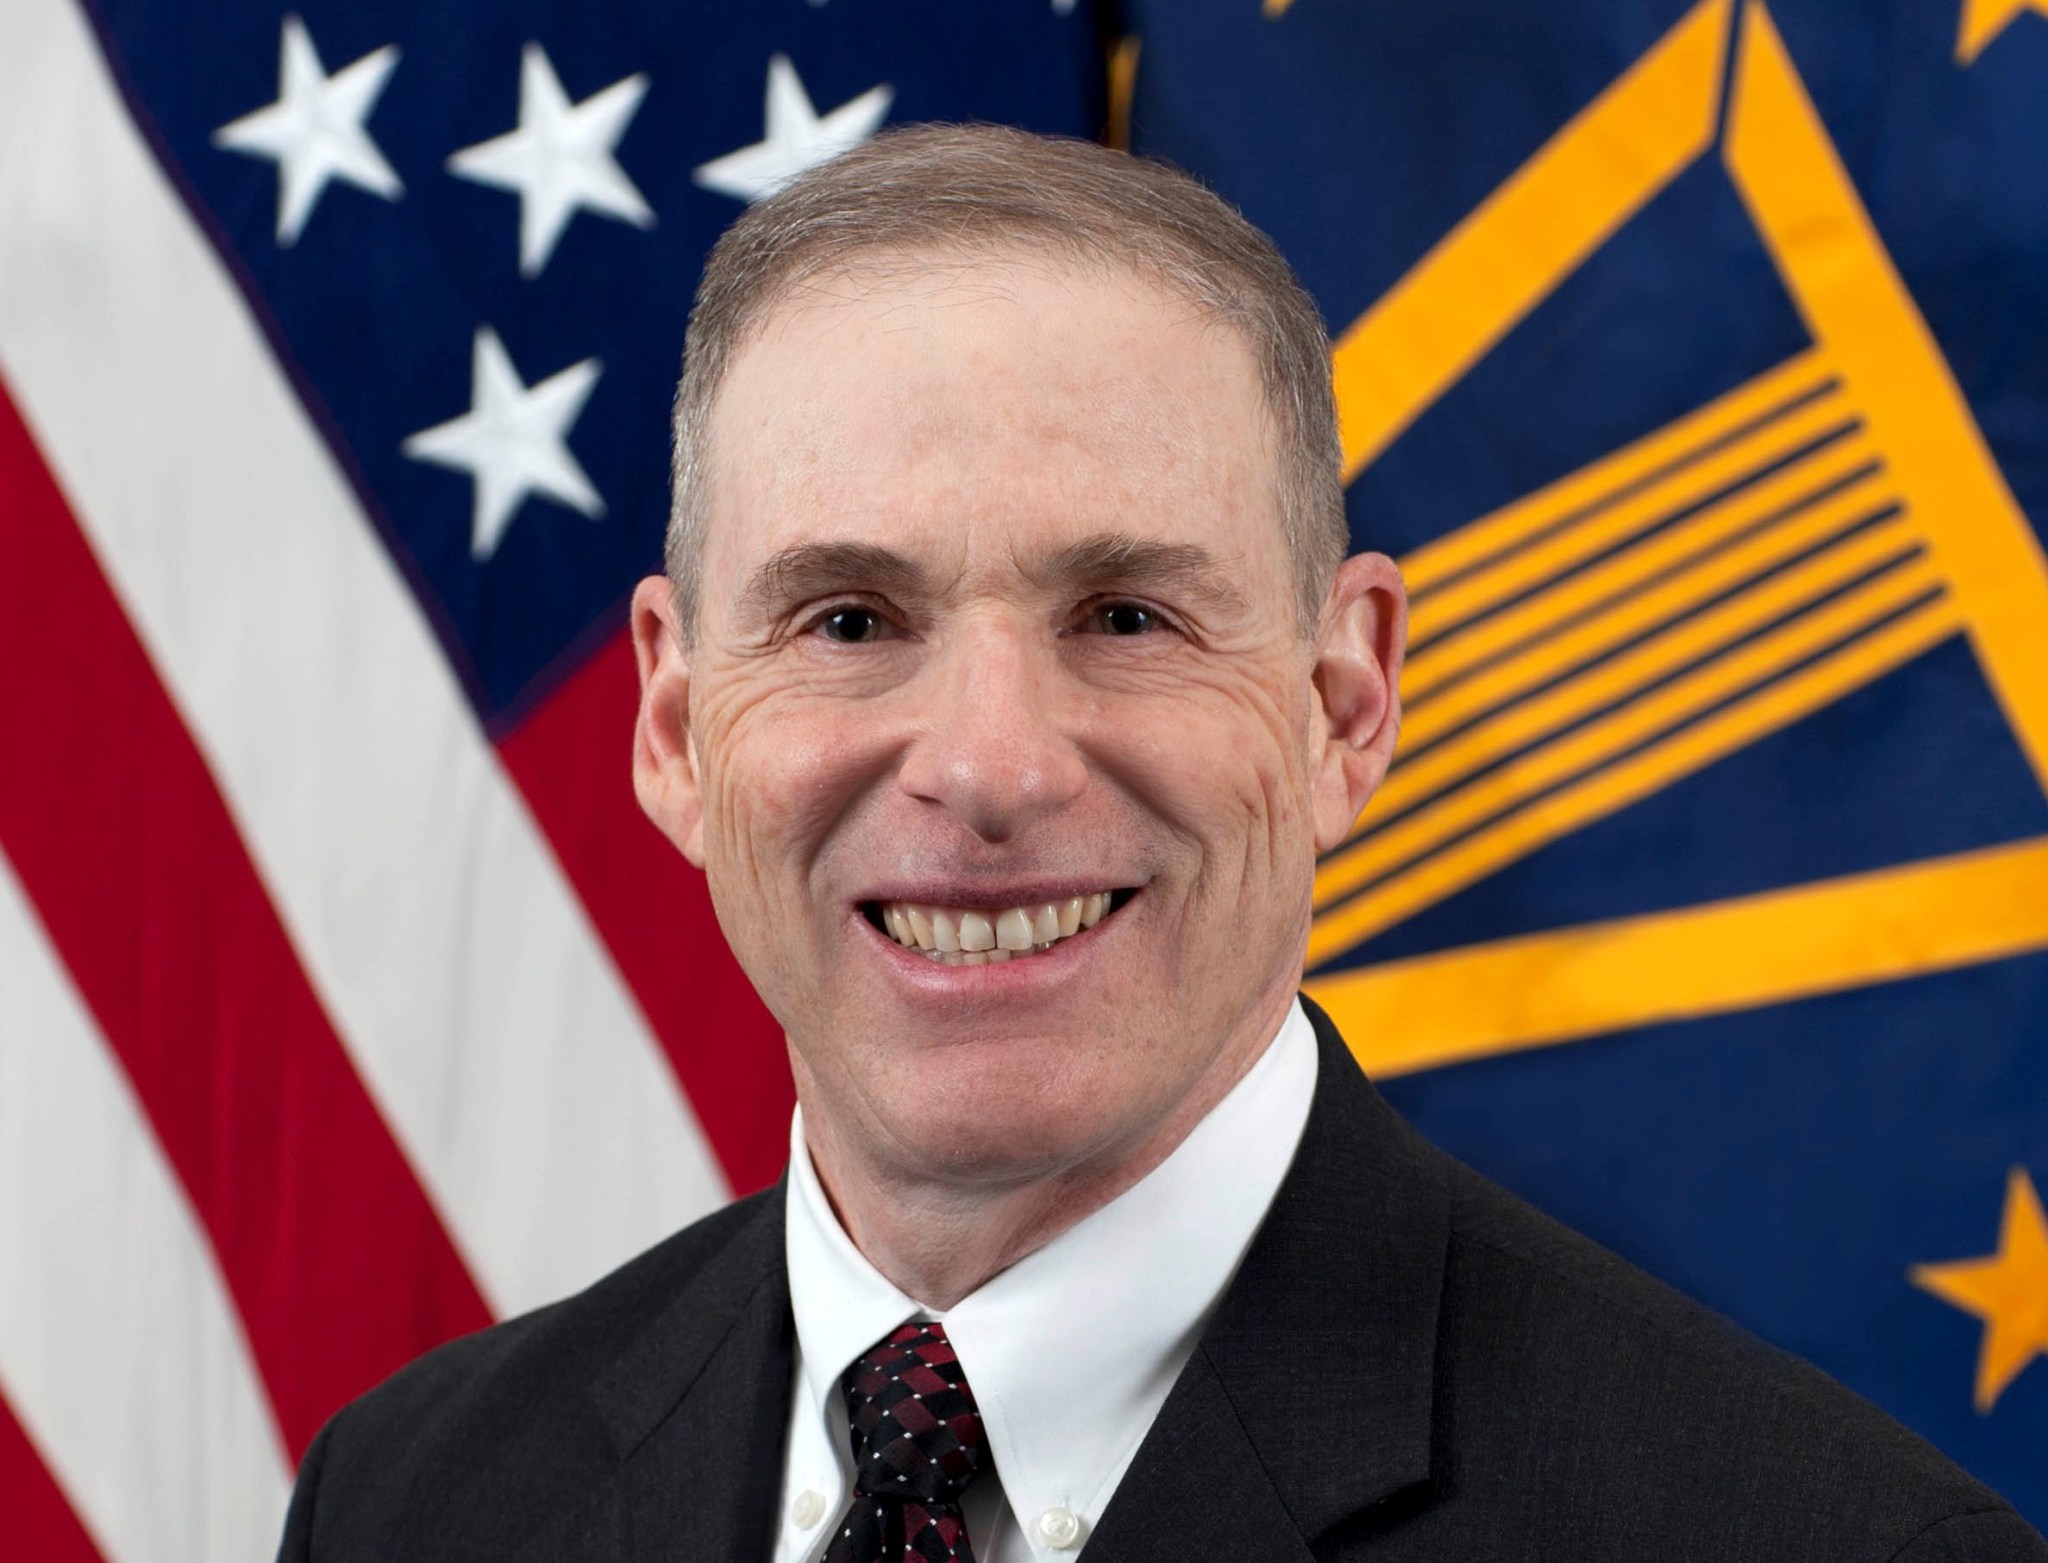 Douglas Loverro, NASA’s new associate administrator for the Human Exploration and Operations Mission Directorate.